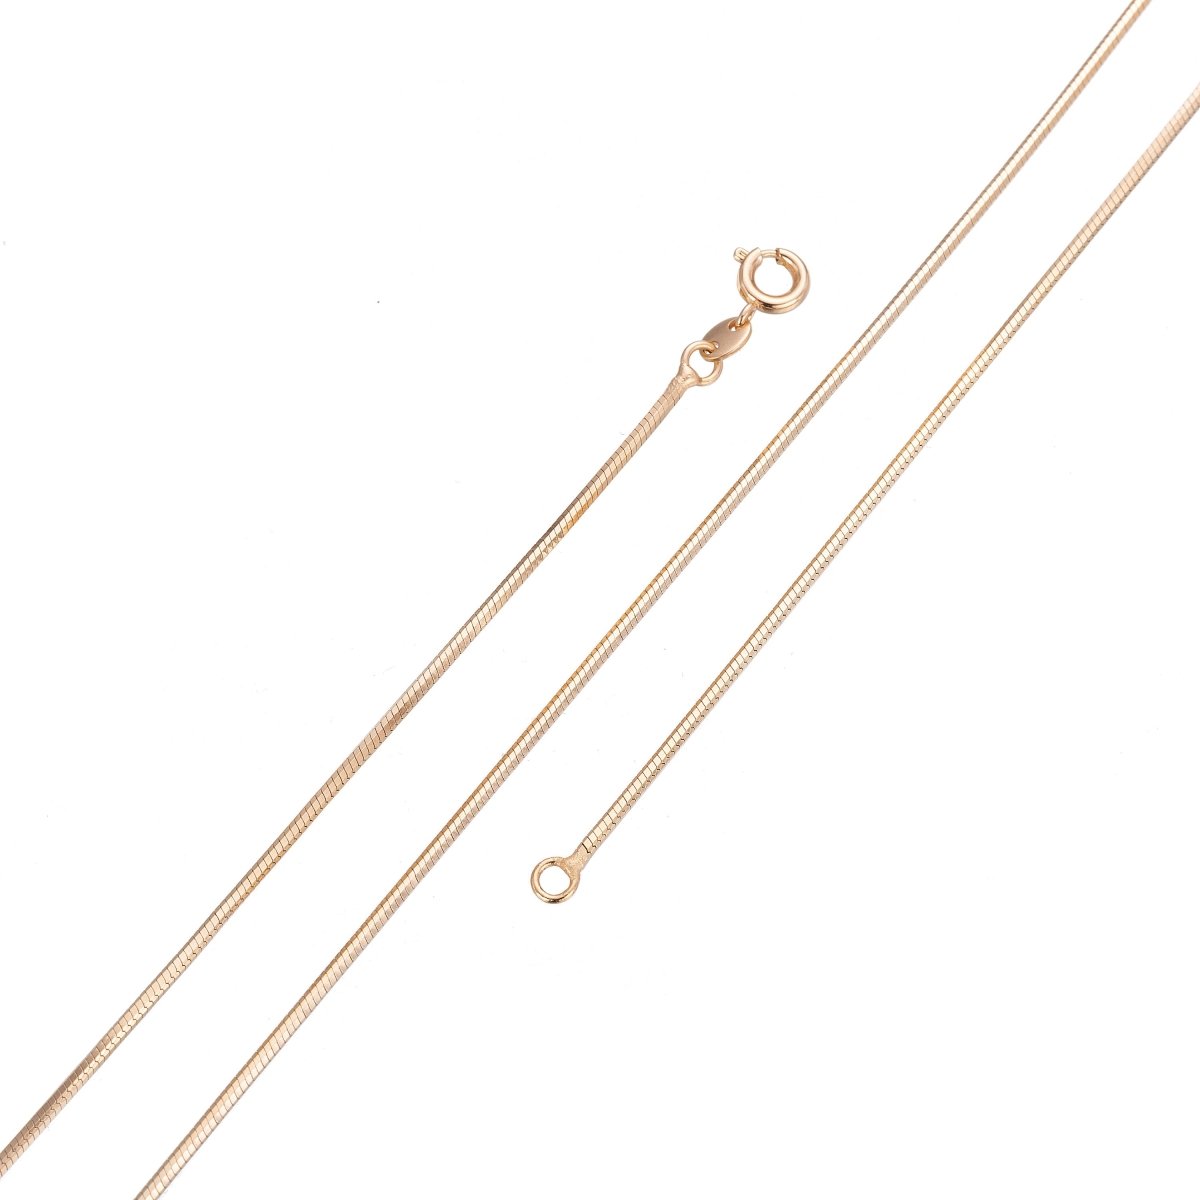 Rose Gold Cocoon Chain Necklace, 24.5" Gold Plated Layering Cocoon Necklace, Dainty 1.3mm Cocoon Necklace w/ Spring Ring | CN-043 Clearance Pricing - DLUXCA